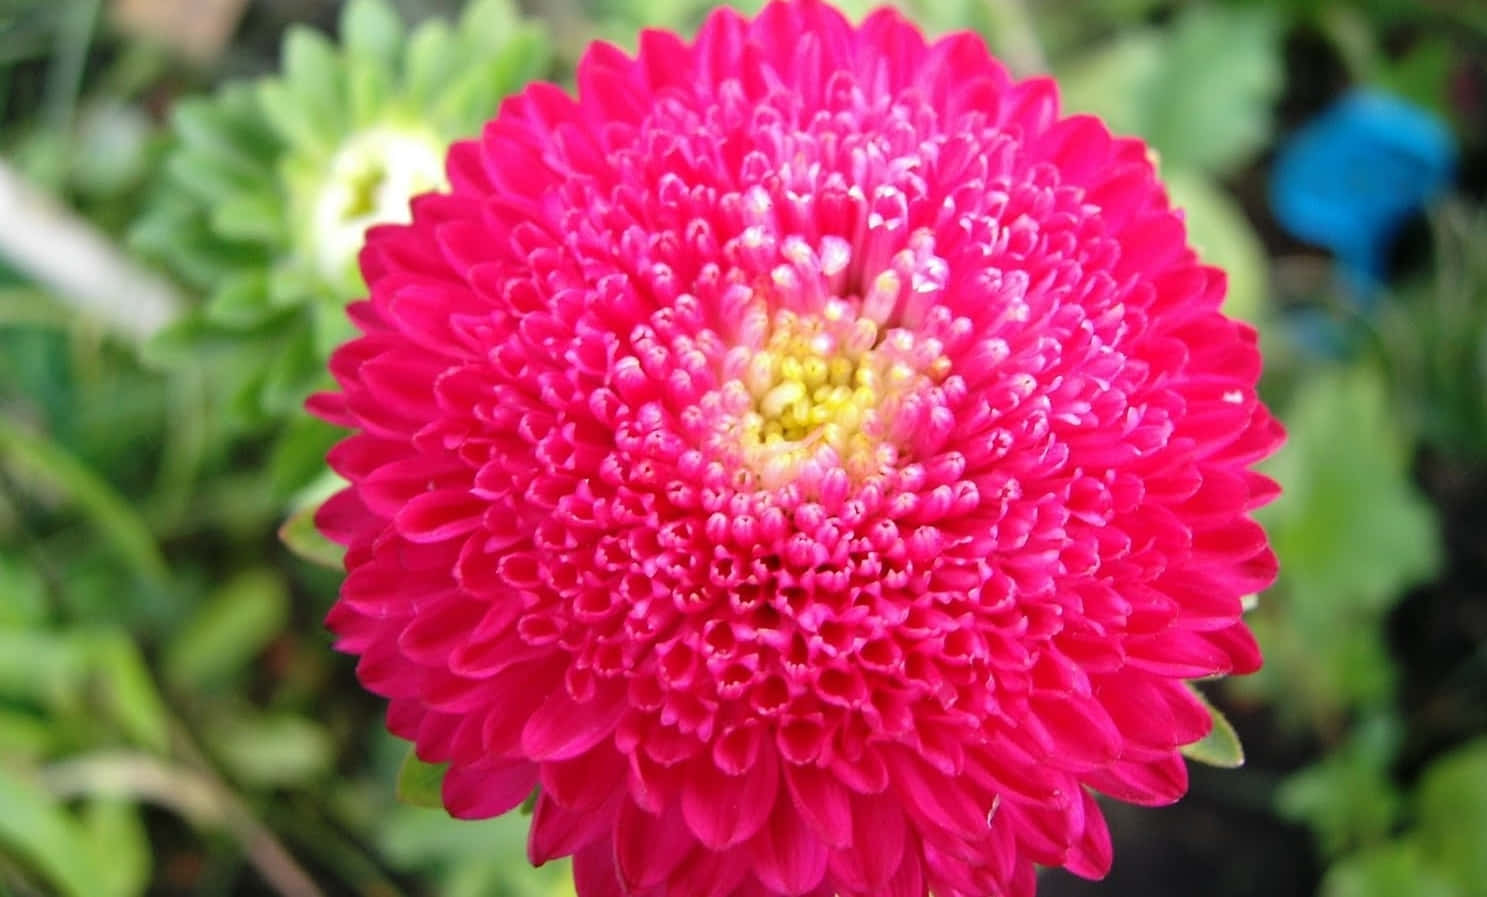 A vibrant pink chrysanthemum flower on a white background